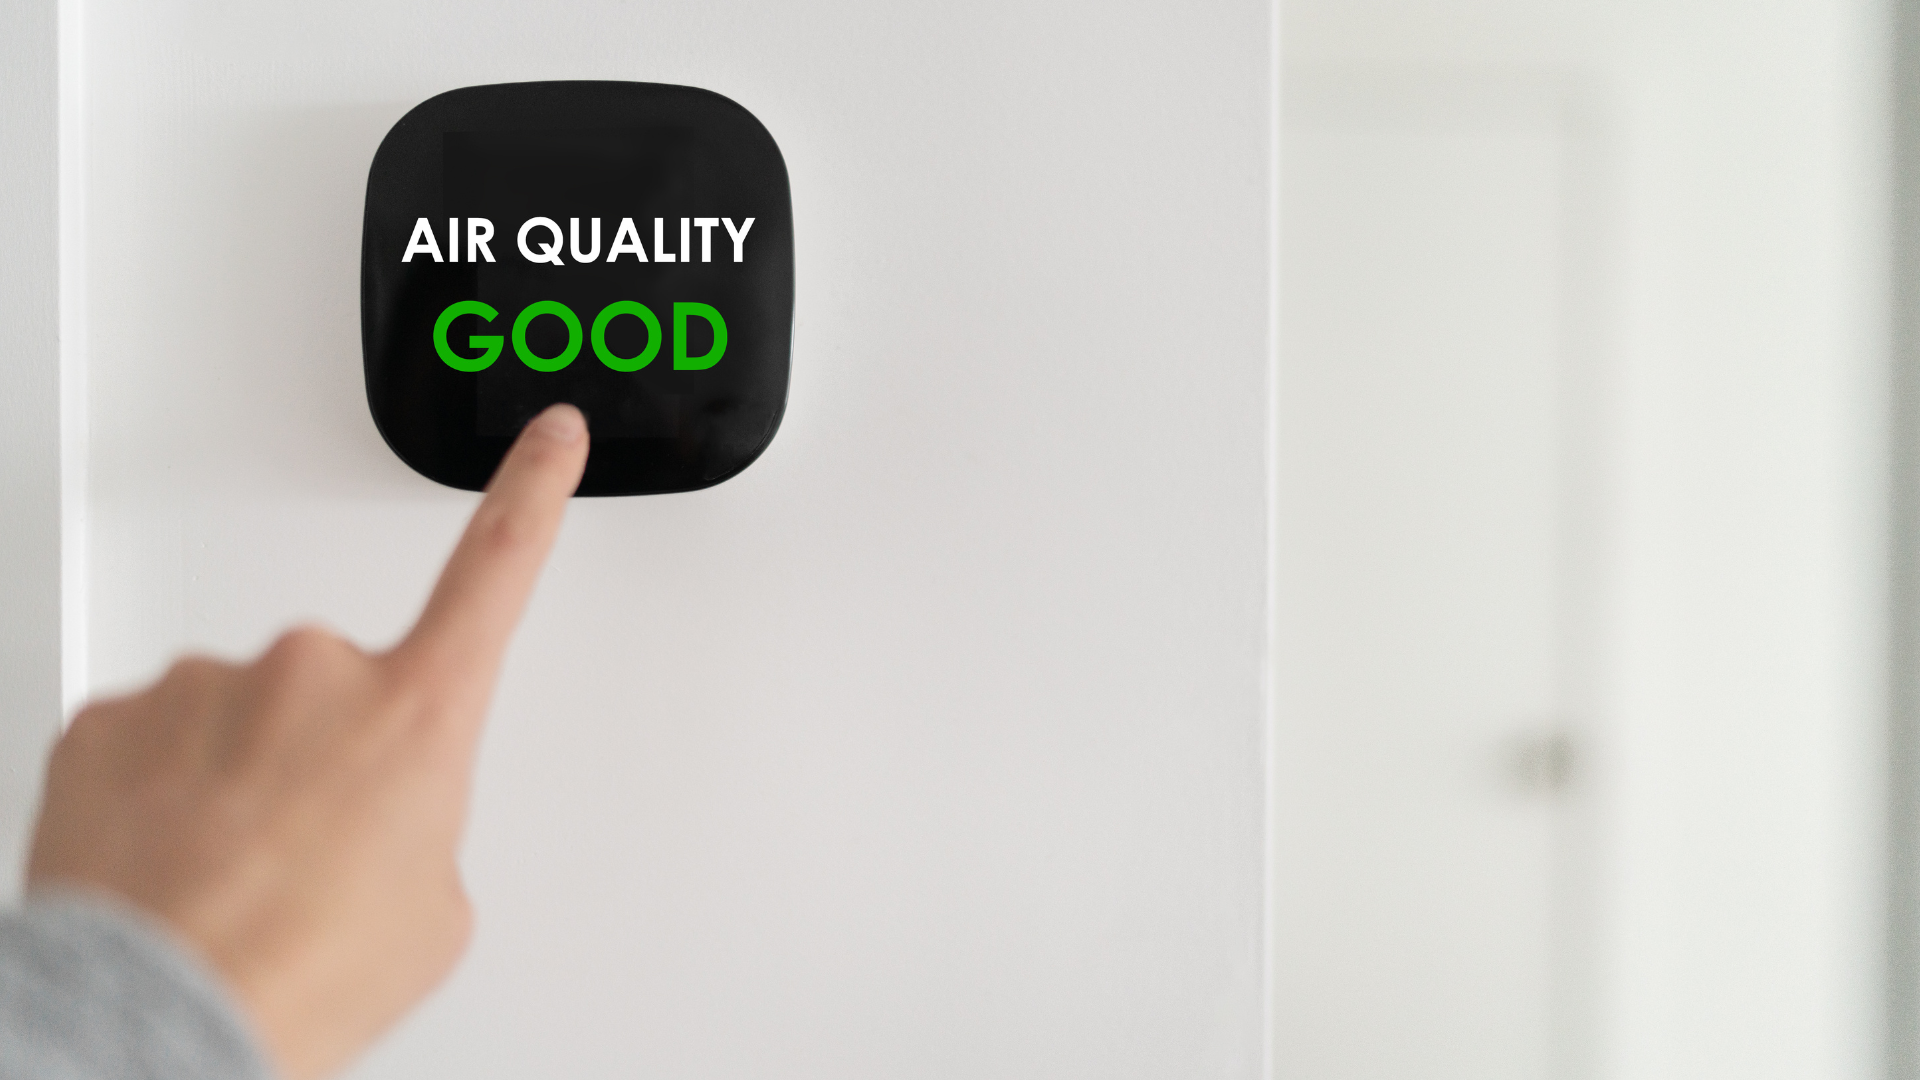 A person is pressing a button on a wall that says `` air quality good ''.